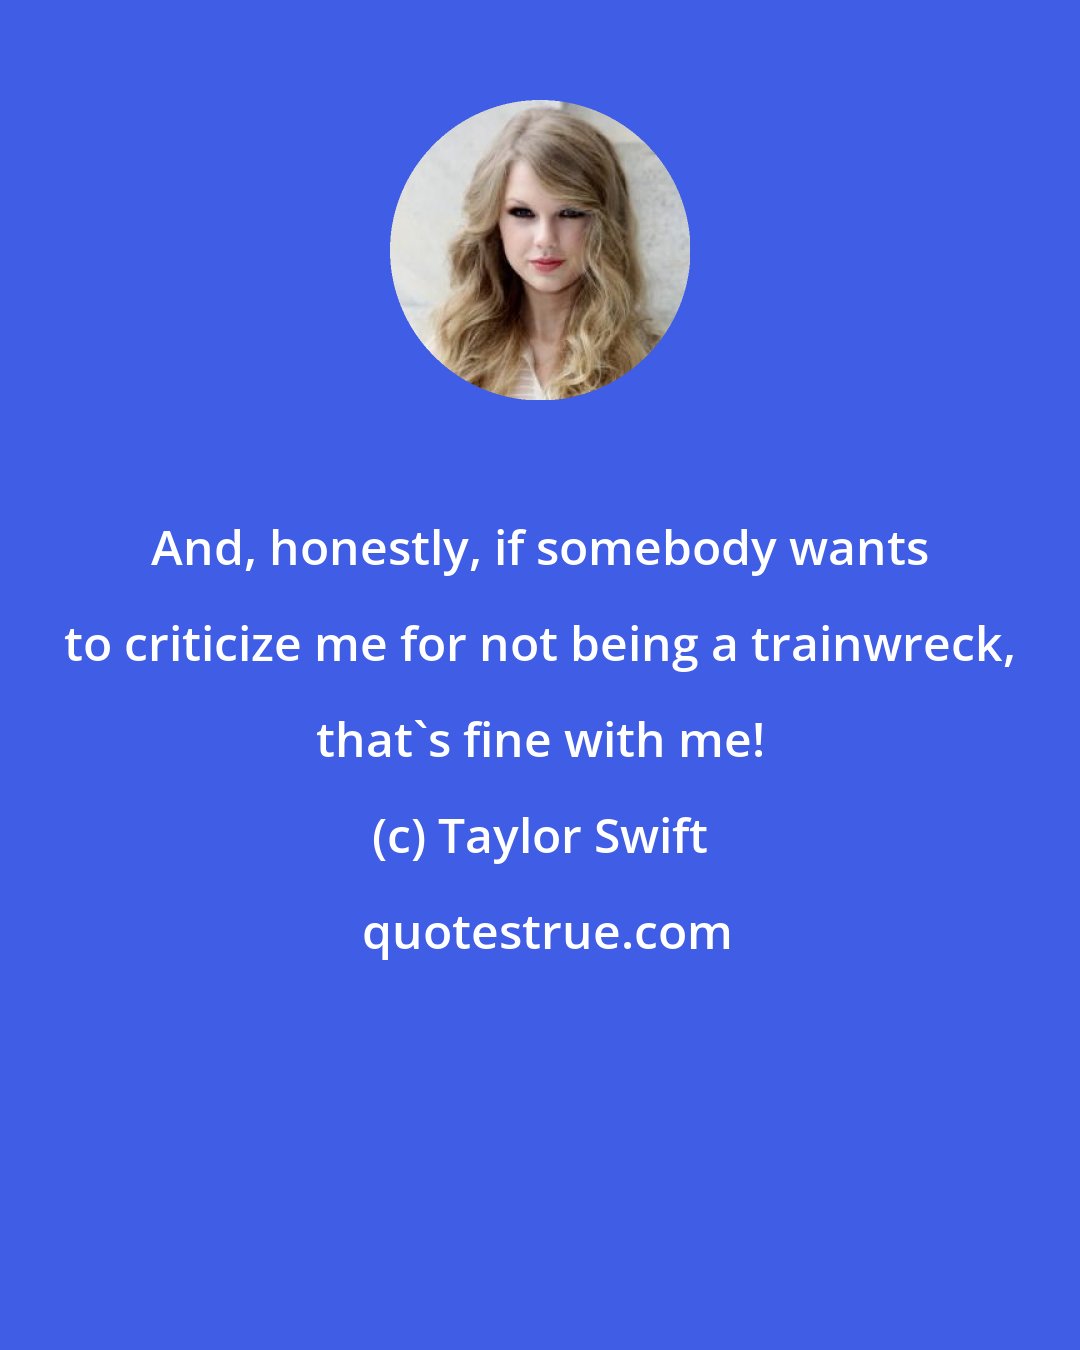 Taylor Swift: And, honestly, if somebody wants to criticize me for not being a trainwreck, that's fine with me!